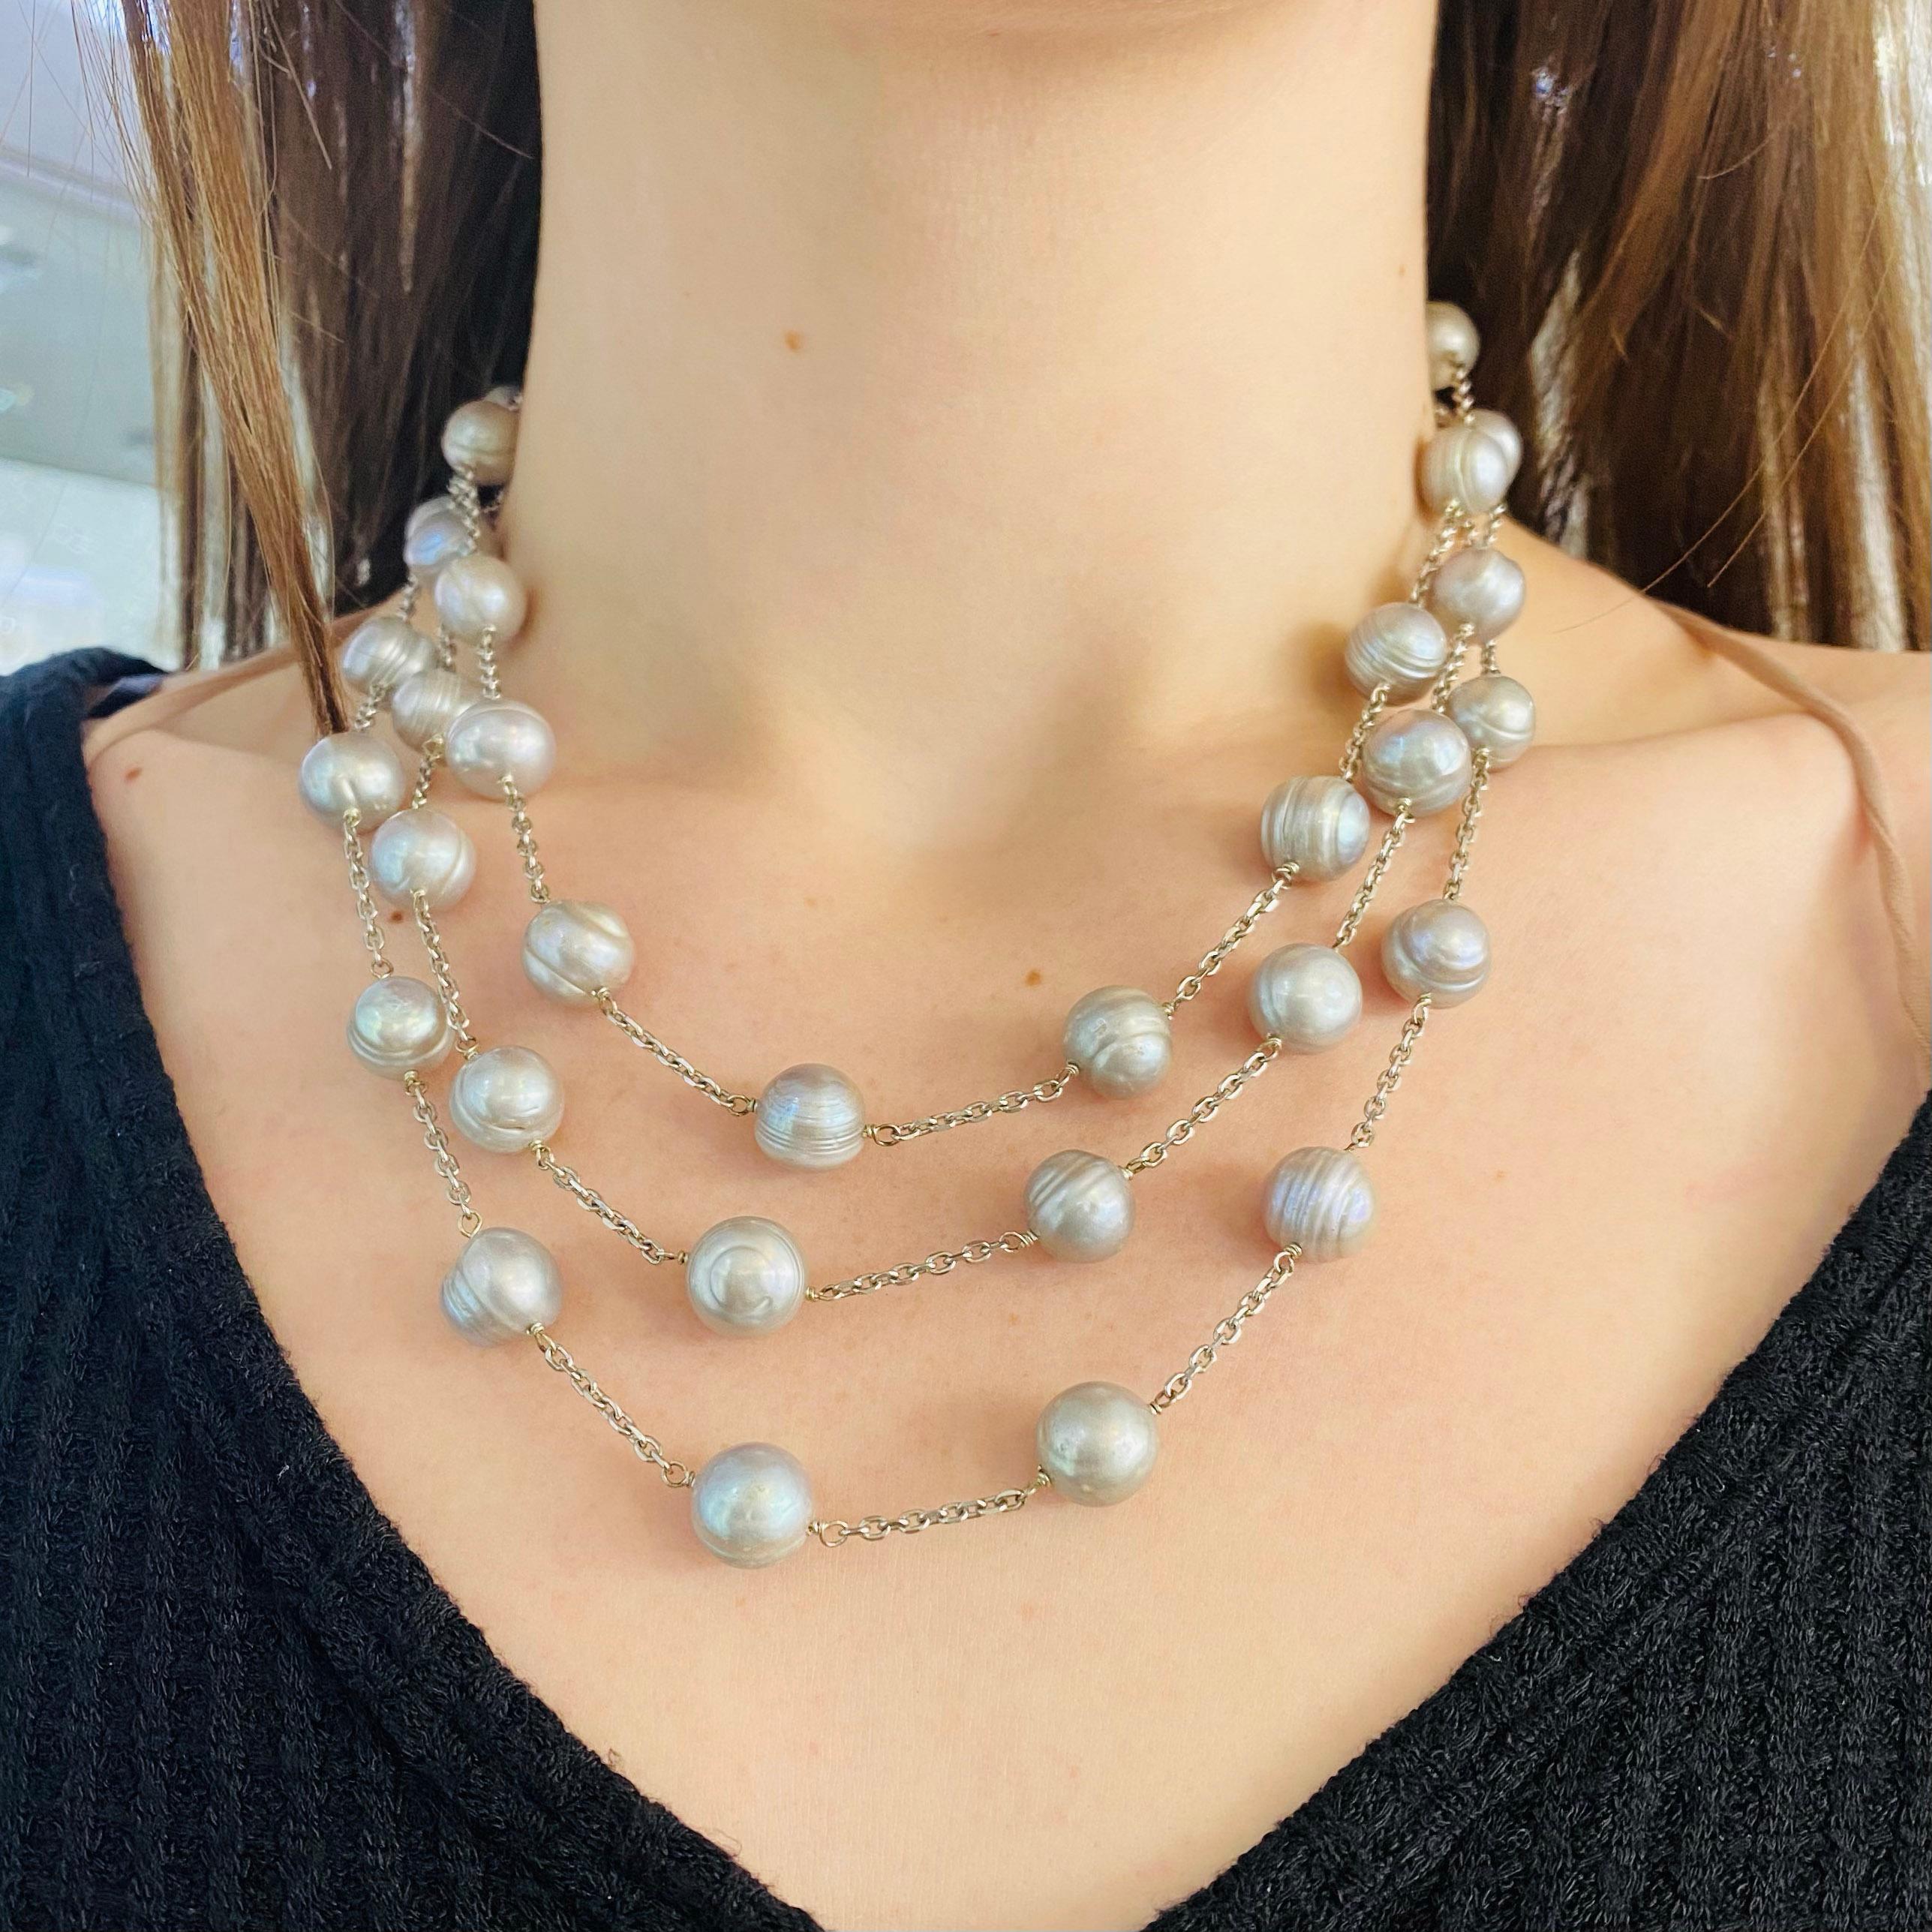 This is an amazing freshwater pearl necklace that has gray pearls.  The three strands are tapered in length so that they hang perfectly on your neck and is designed so that the pearls are spaced in a lovely design. This is a very striking necklace